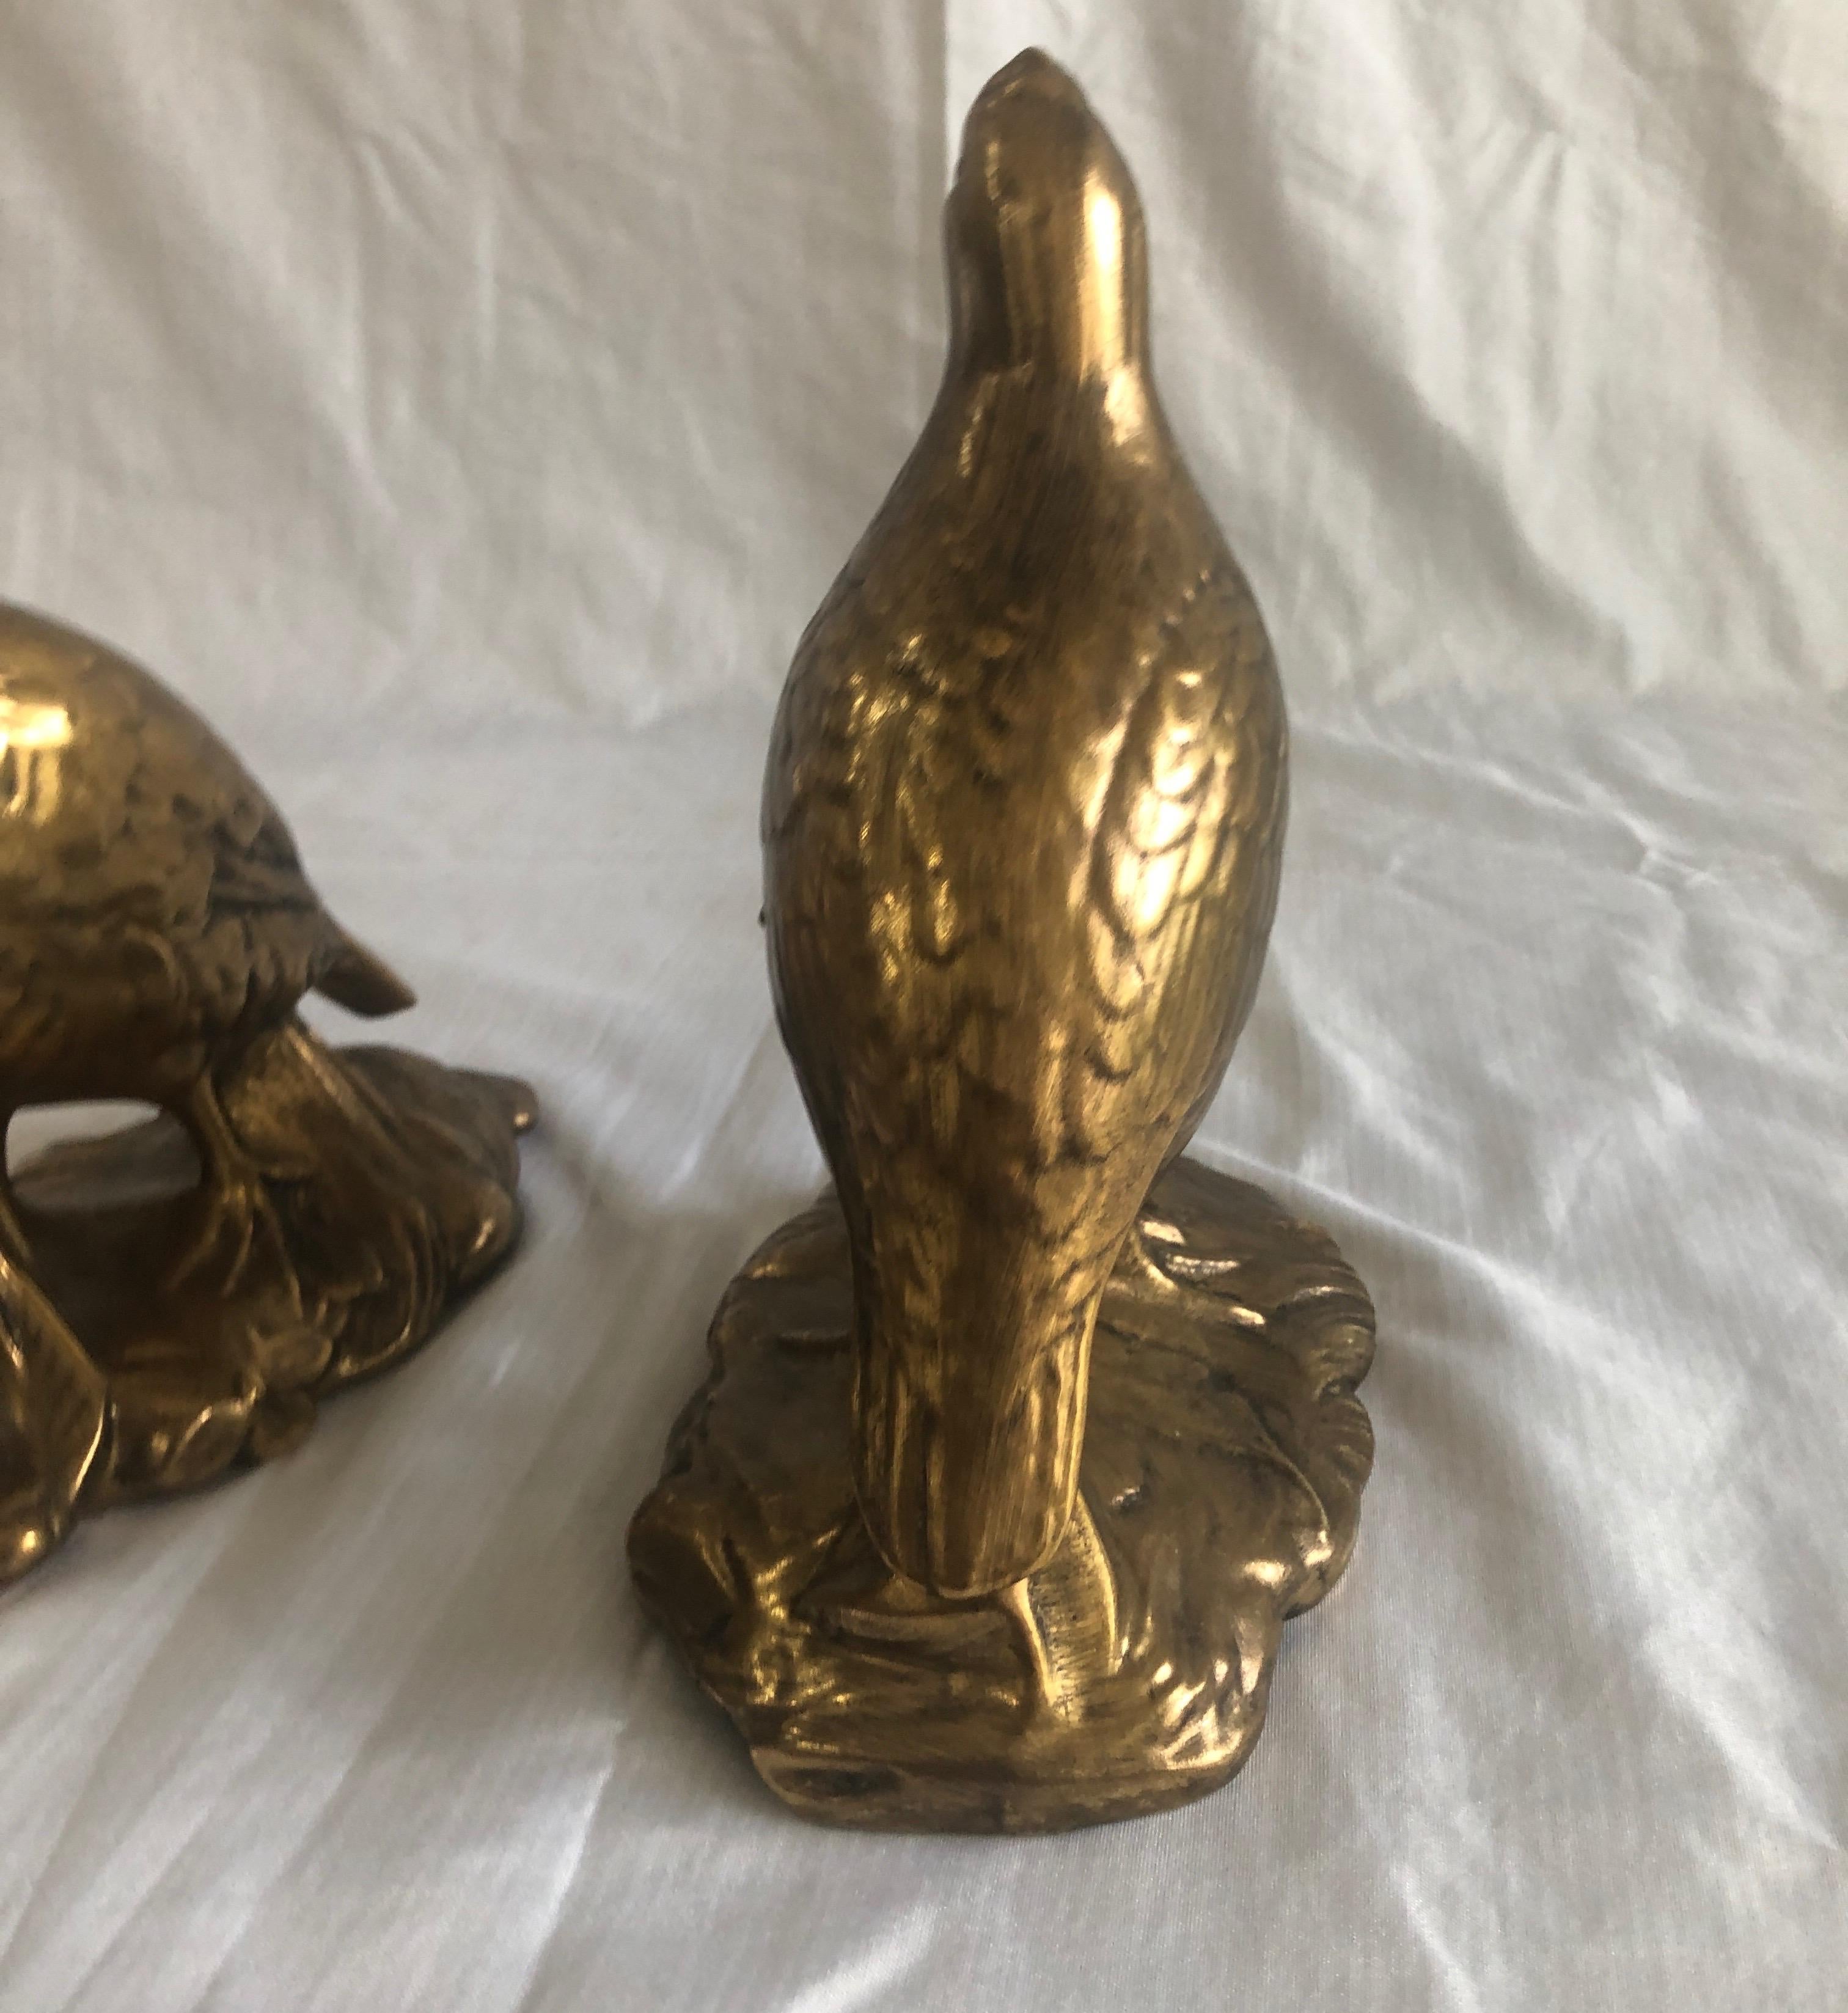 Hand-Crafted Pair of Vintage Gold Ceramic Decorative Birds